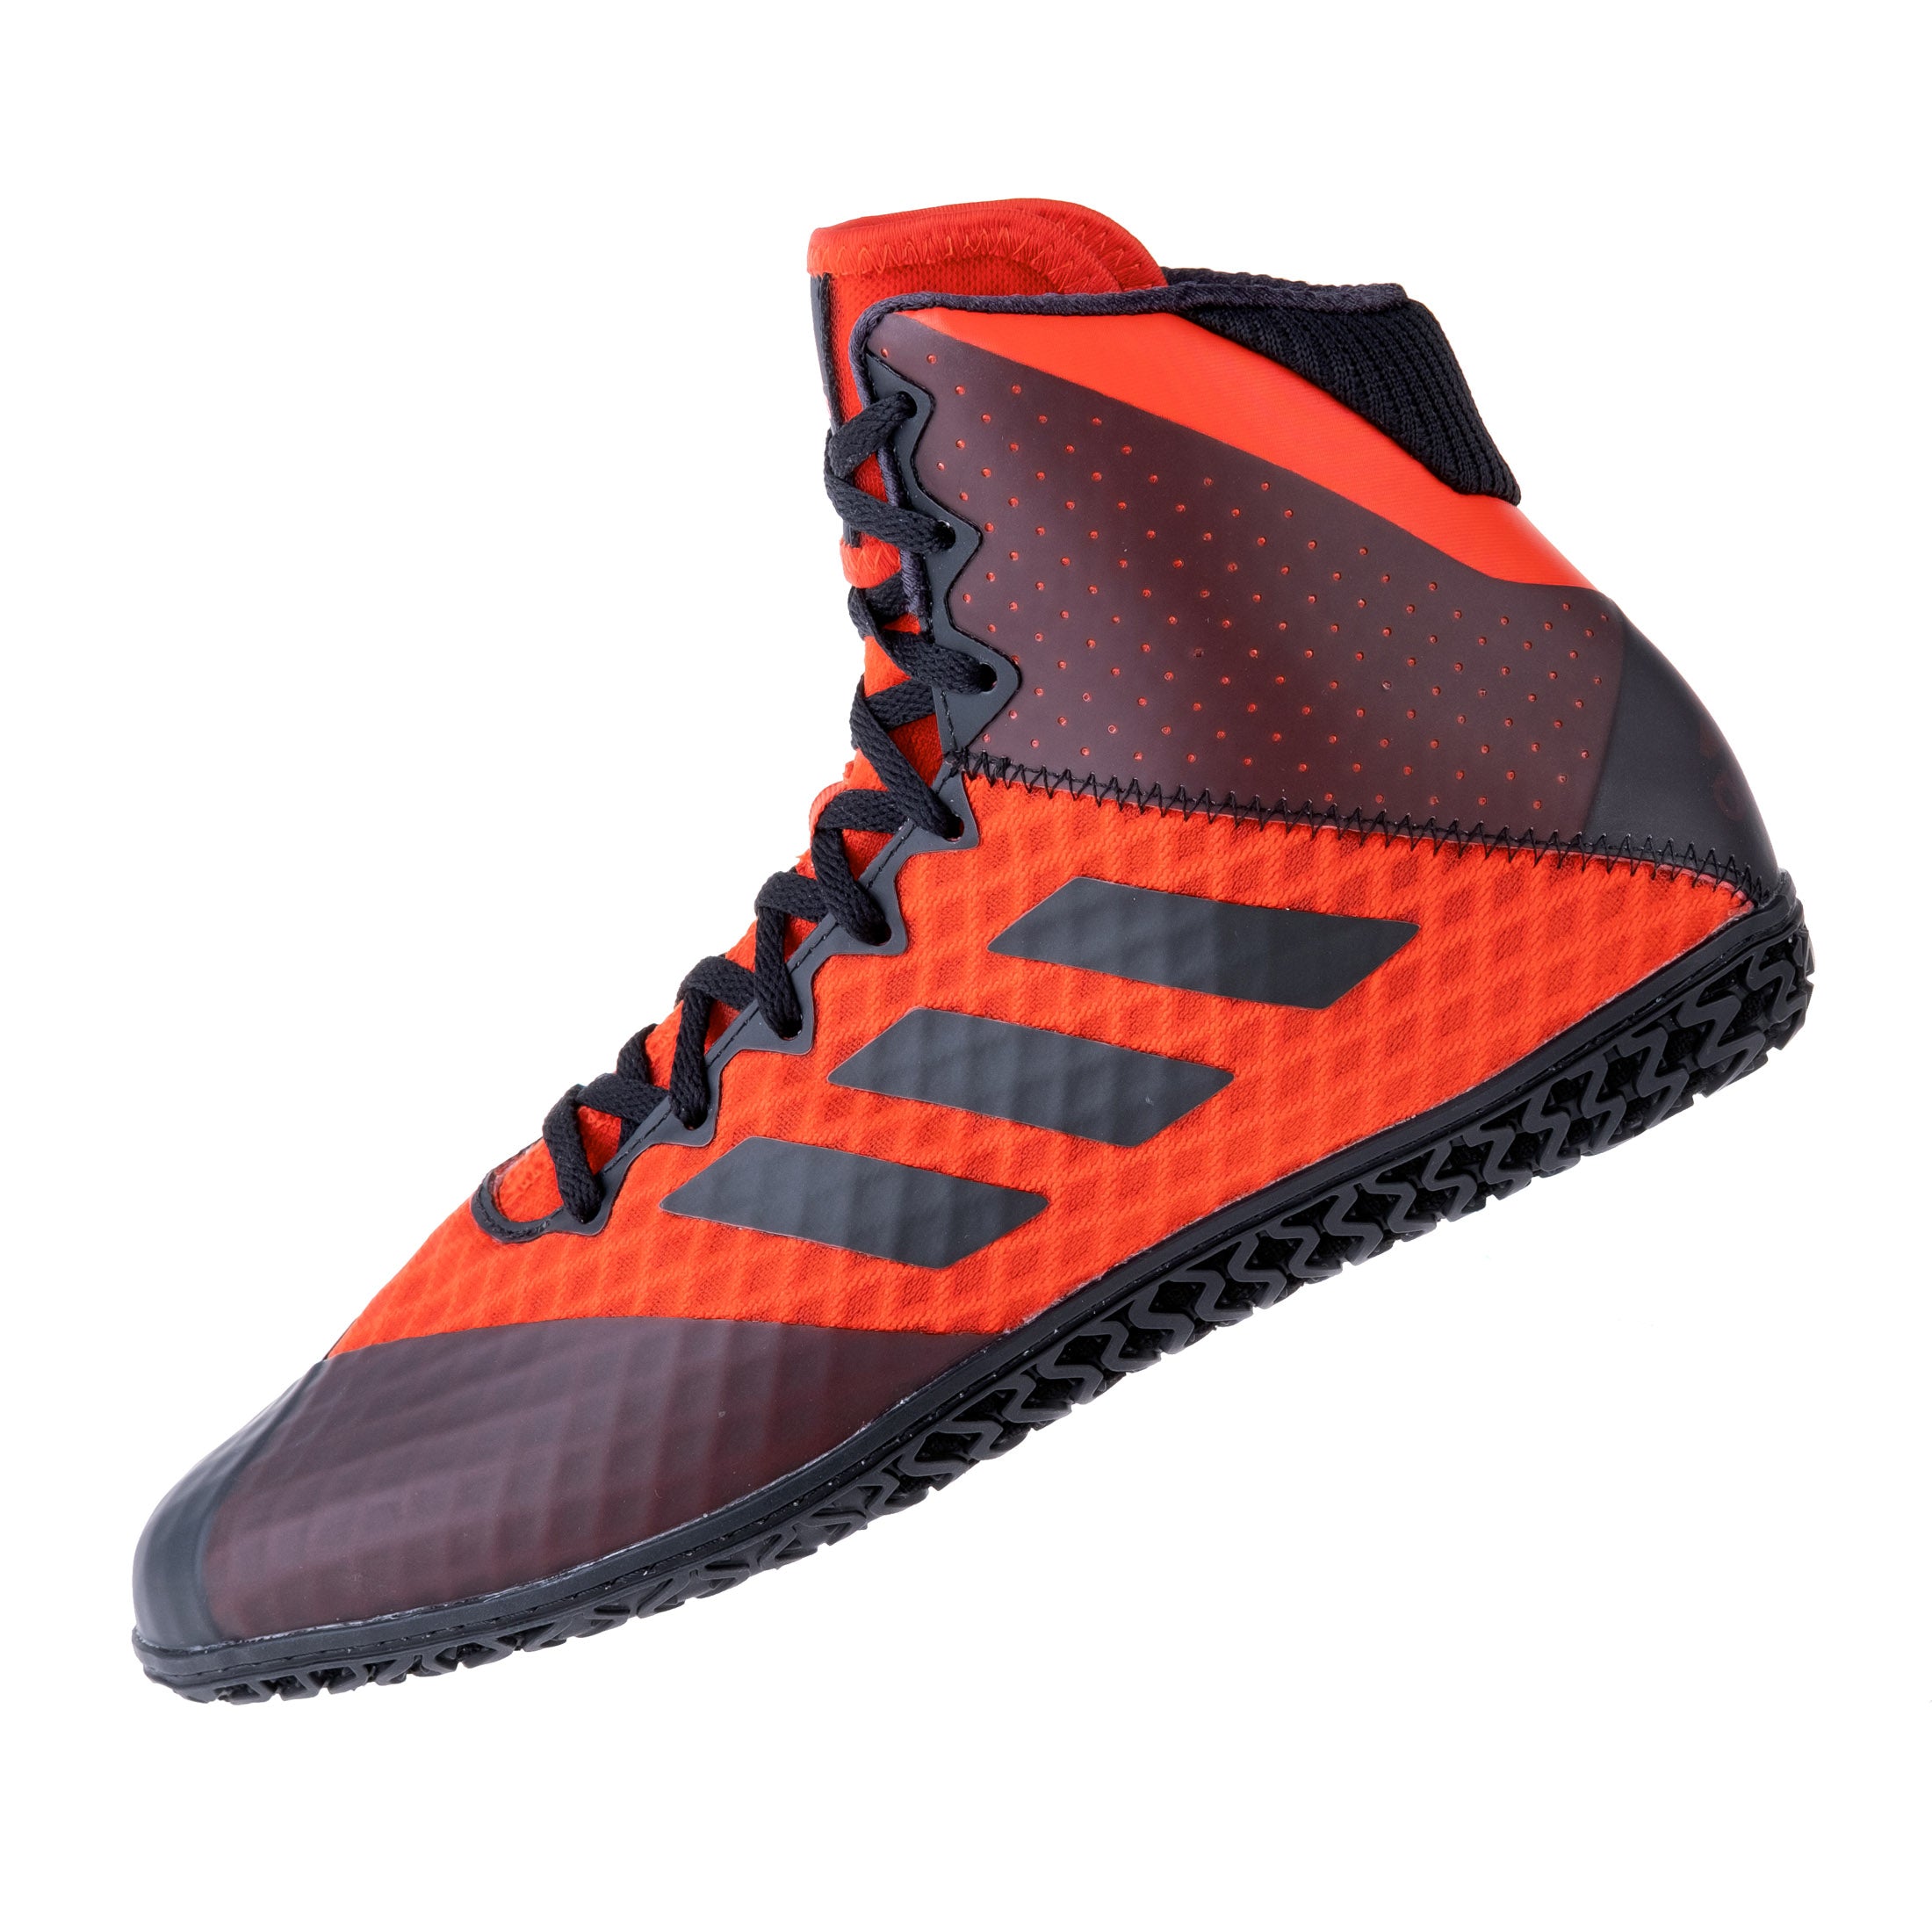 Adidas Wrestling shoes mat Wizard - black/red, BC0532